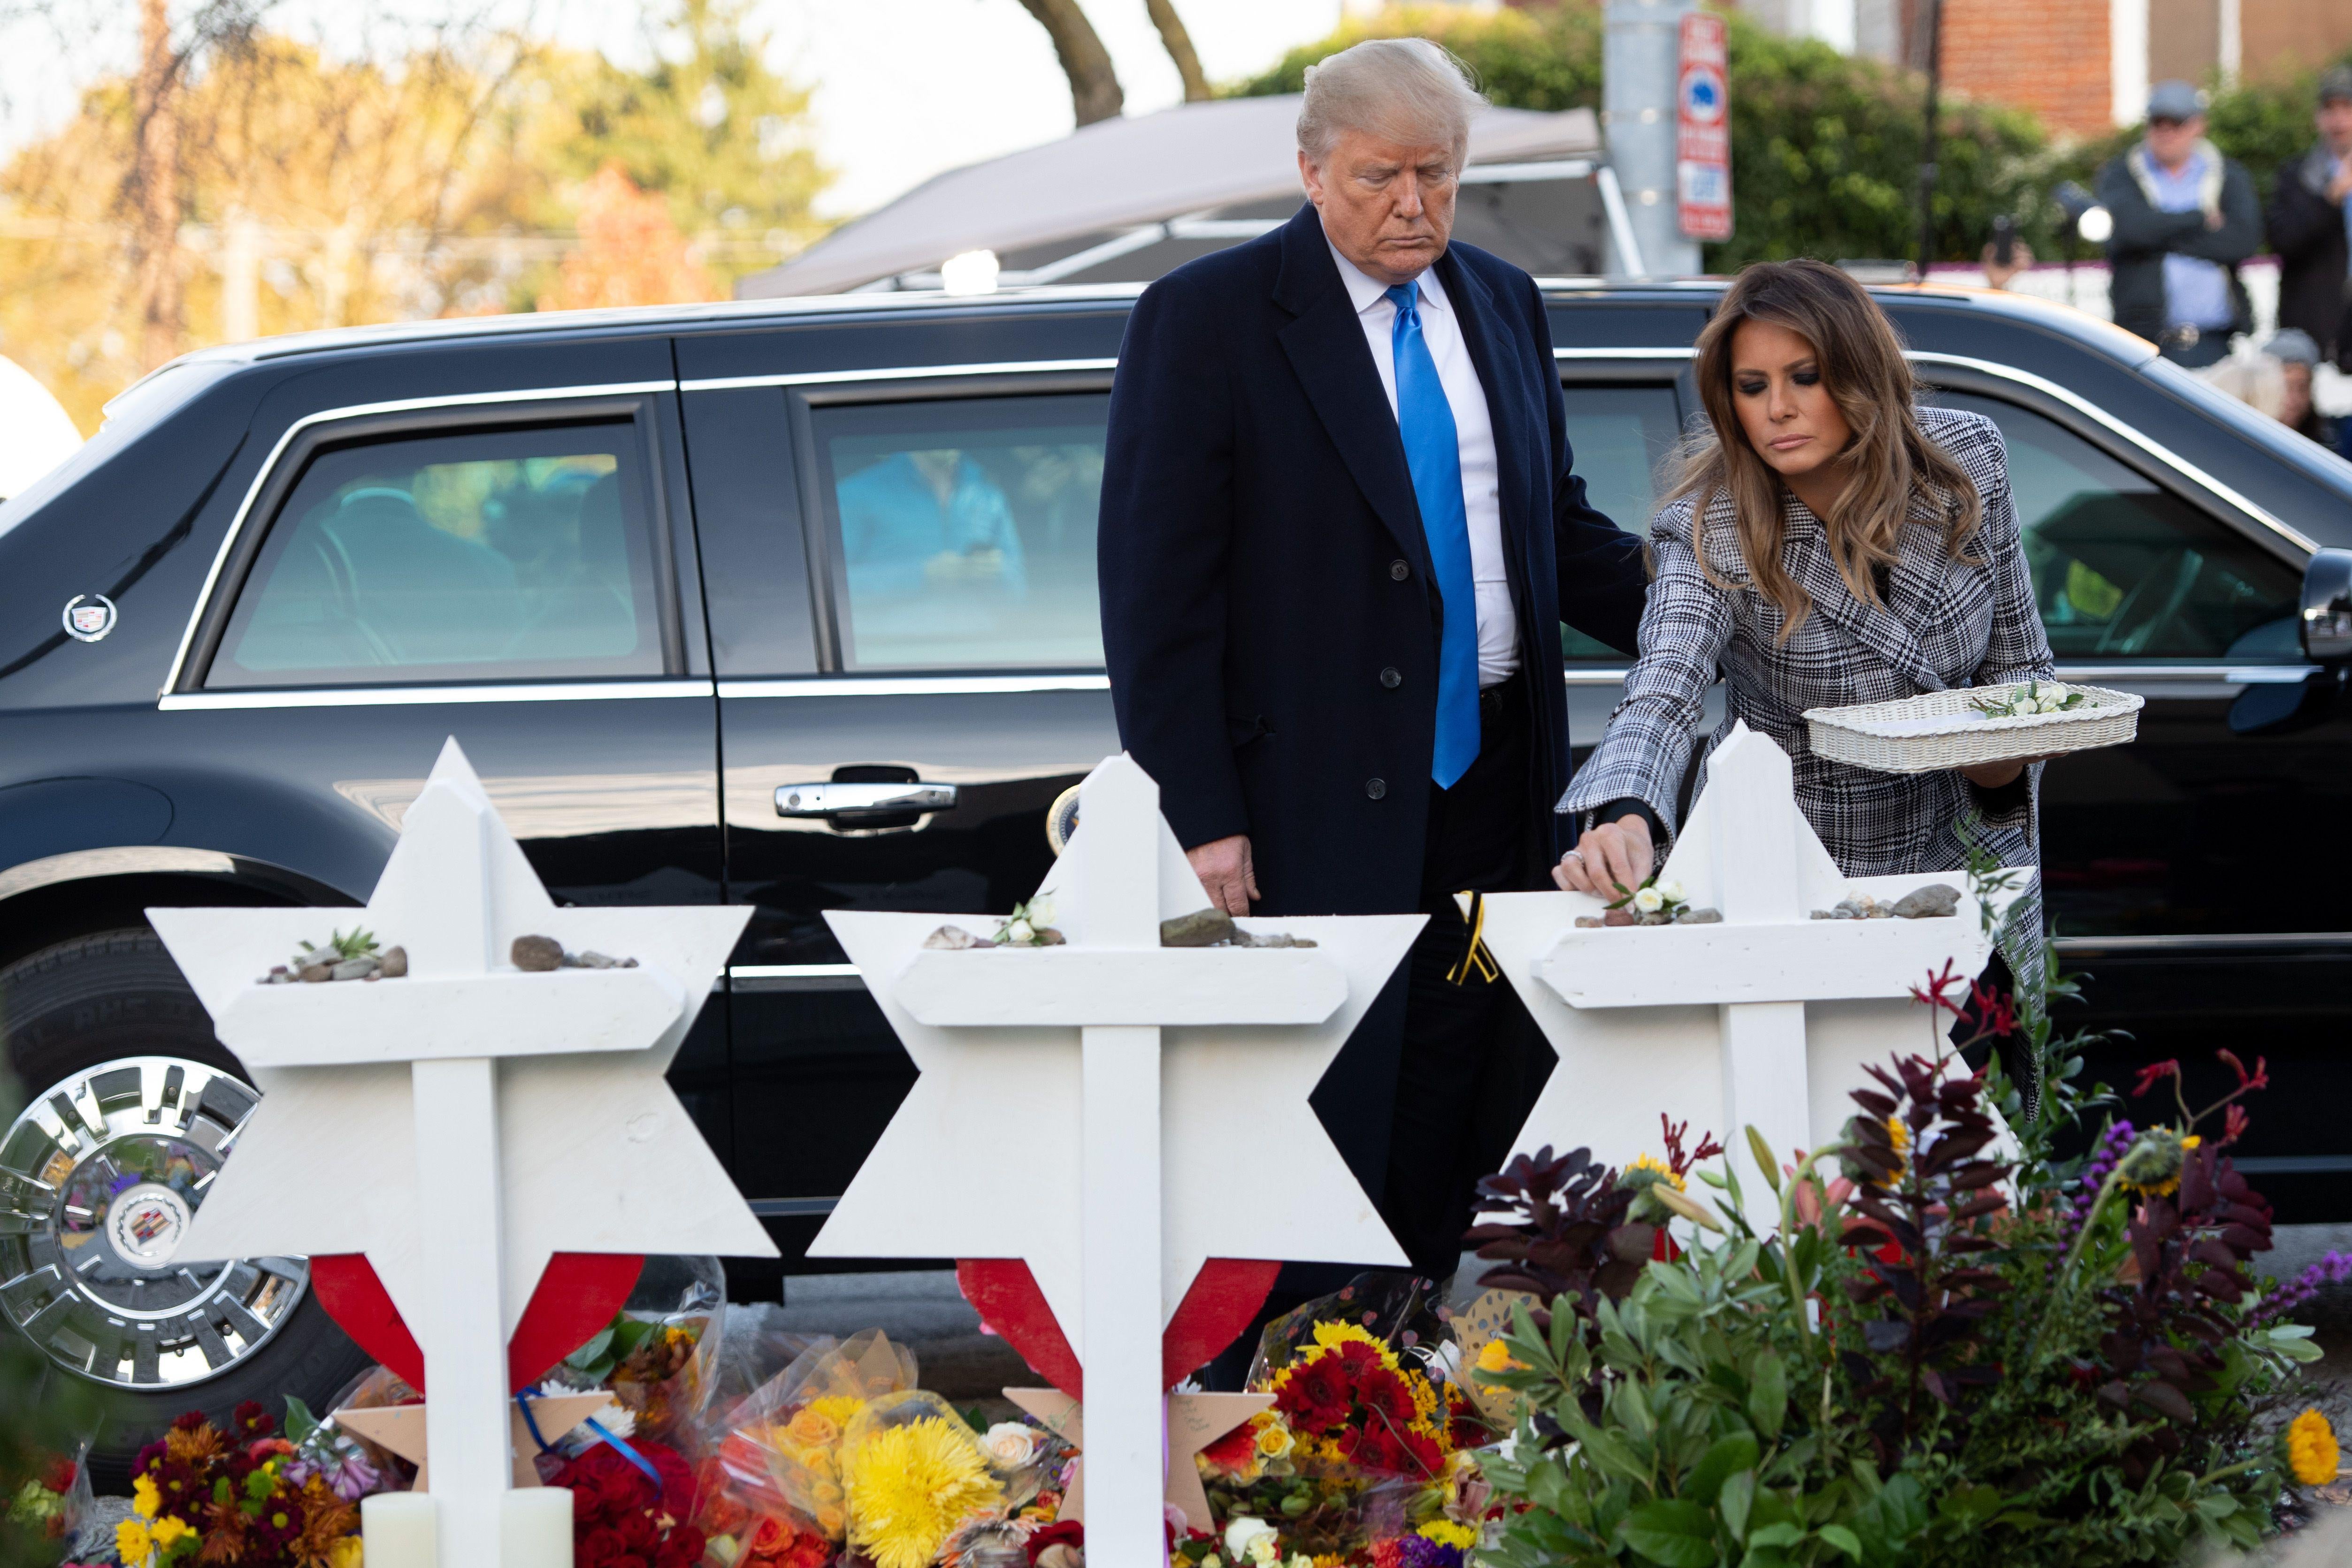 Donald Trump and his wife Melania along with Tree of Life's rabbi Jeffrey Myers, laying stones and flowers at memorials.